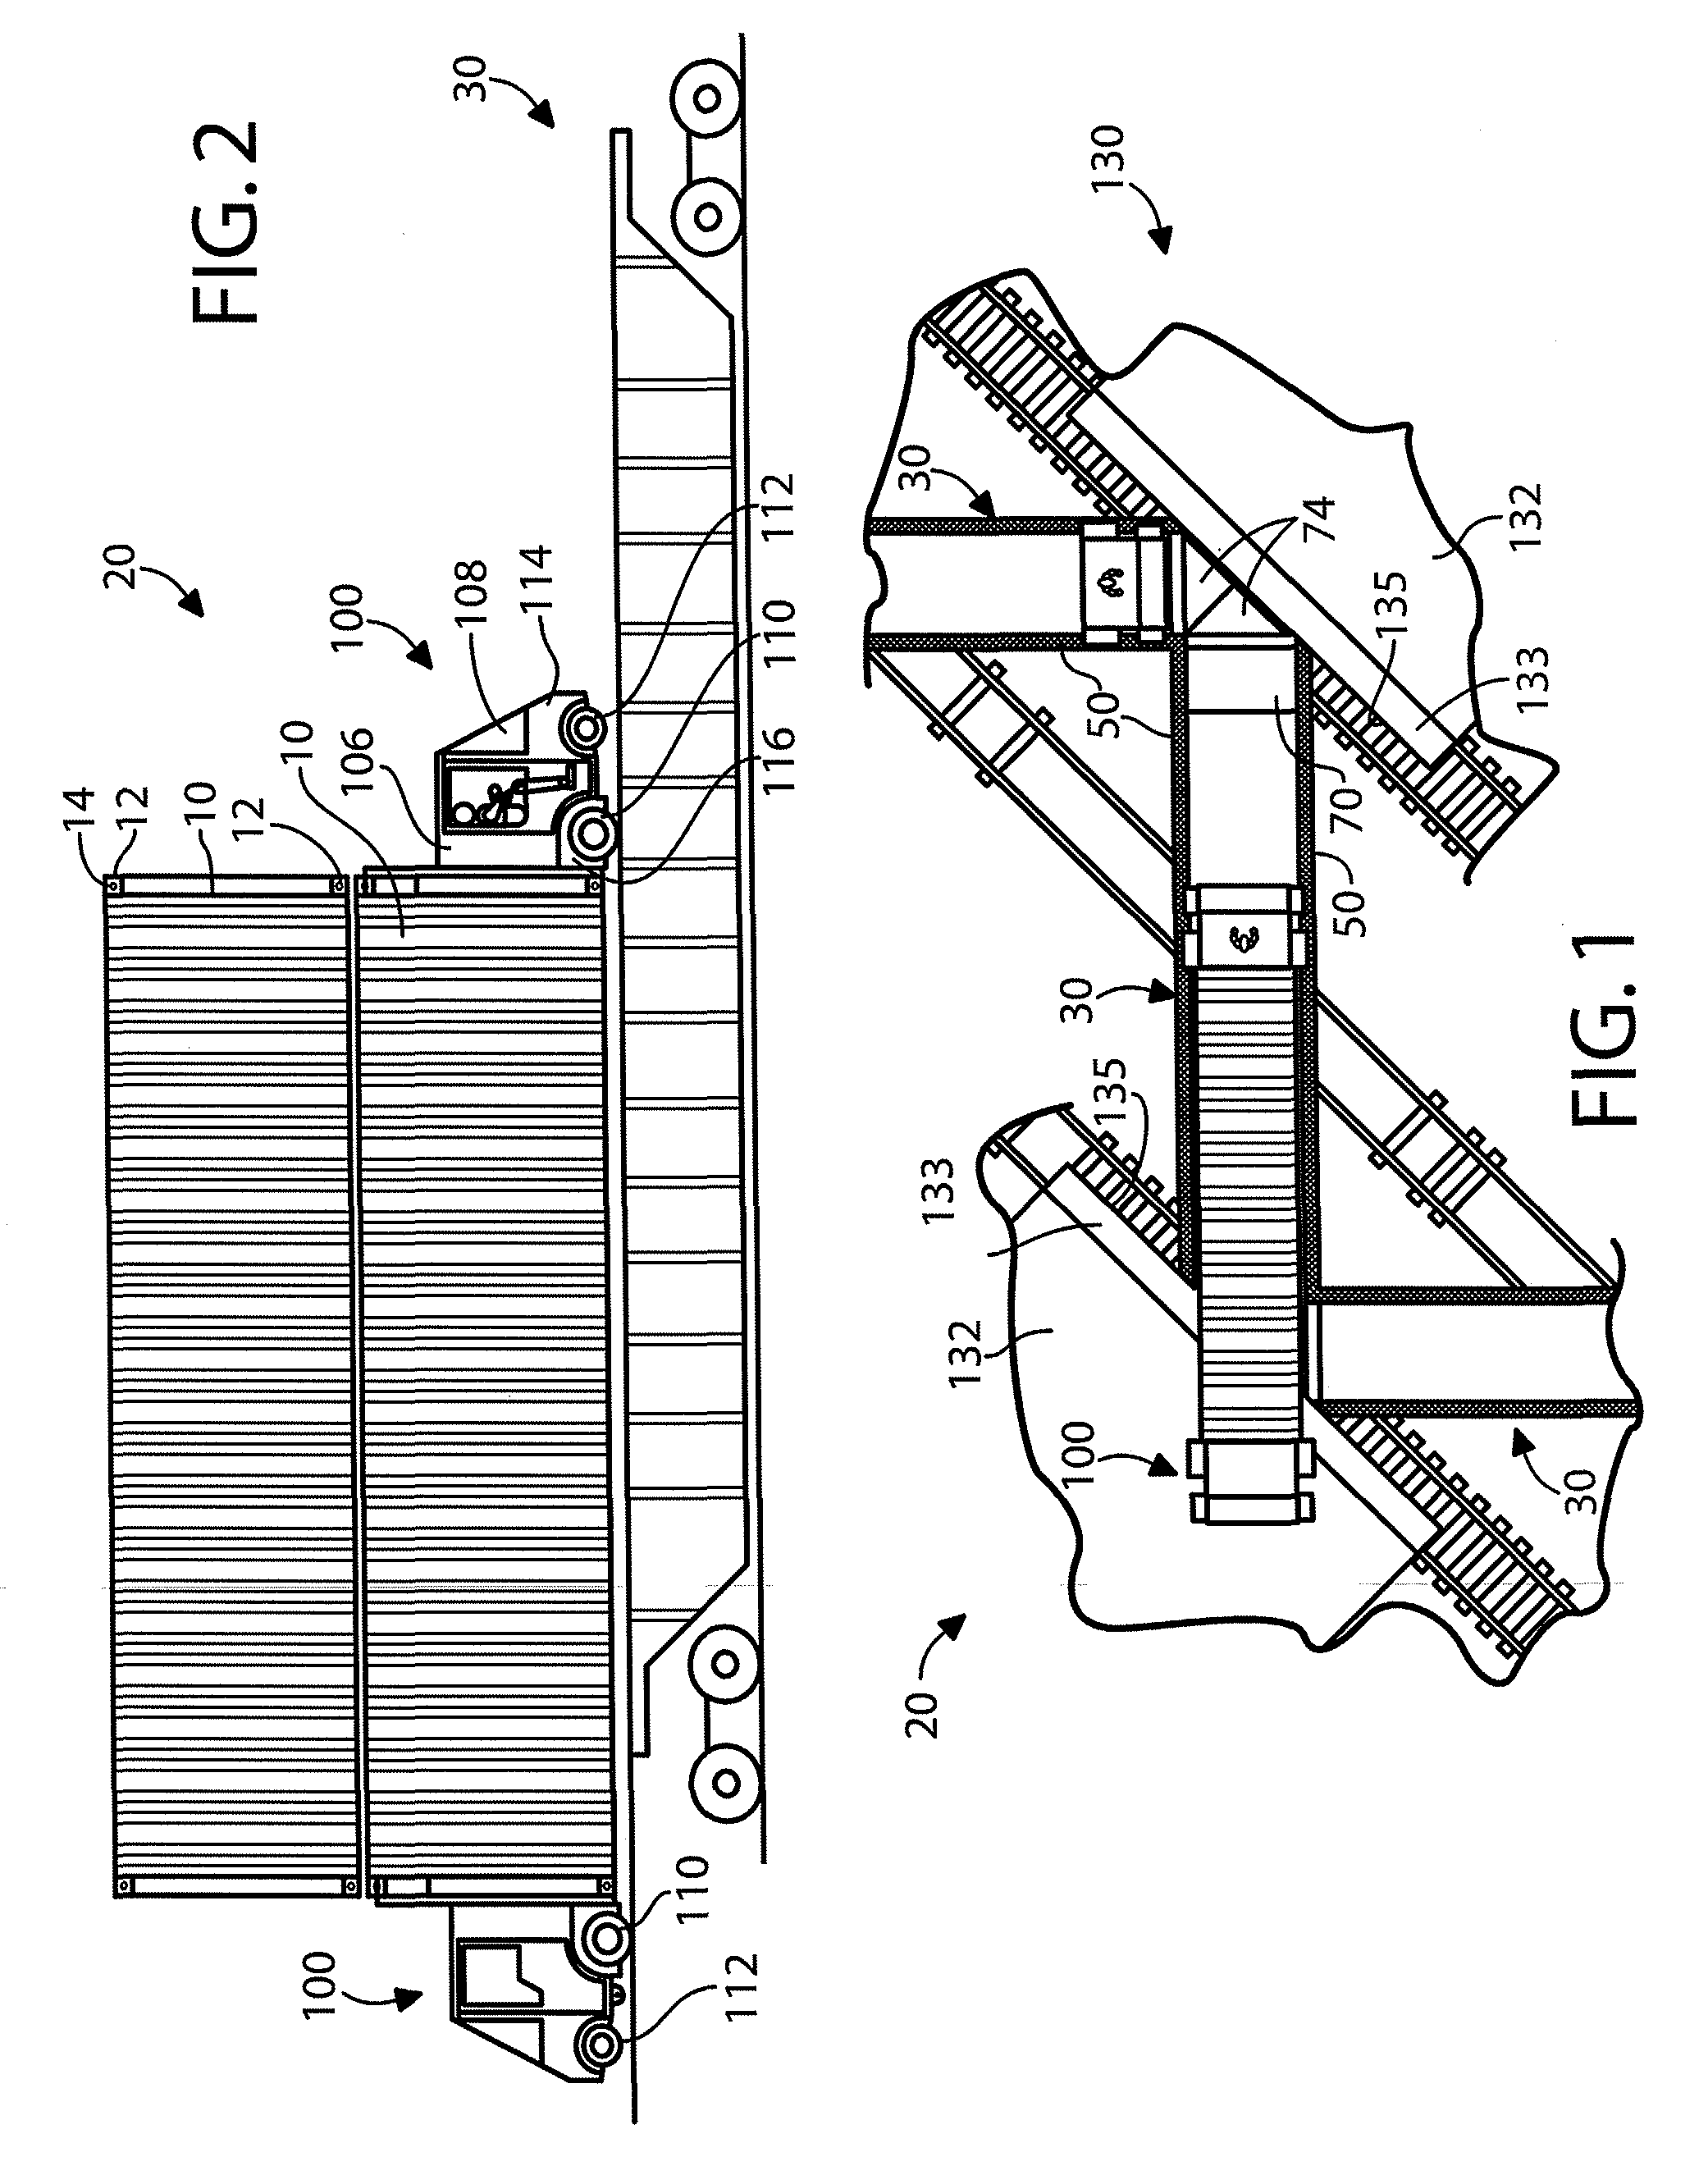 Vehicle, system and method for handling cargo containers